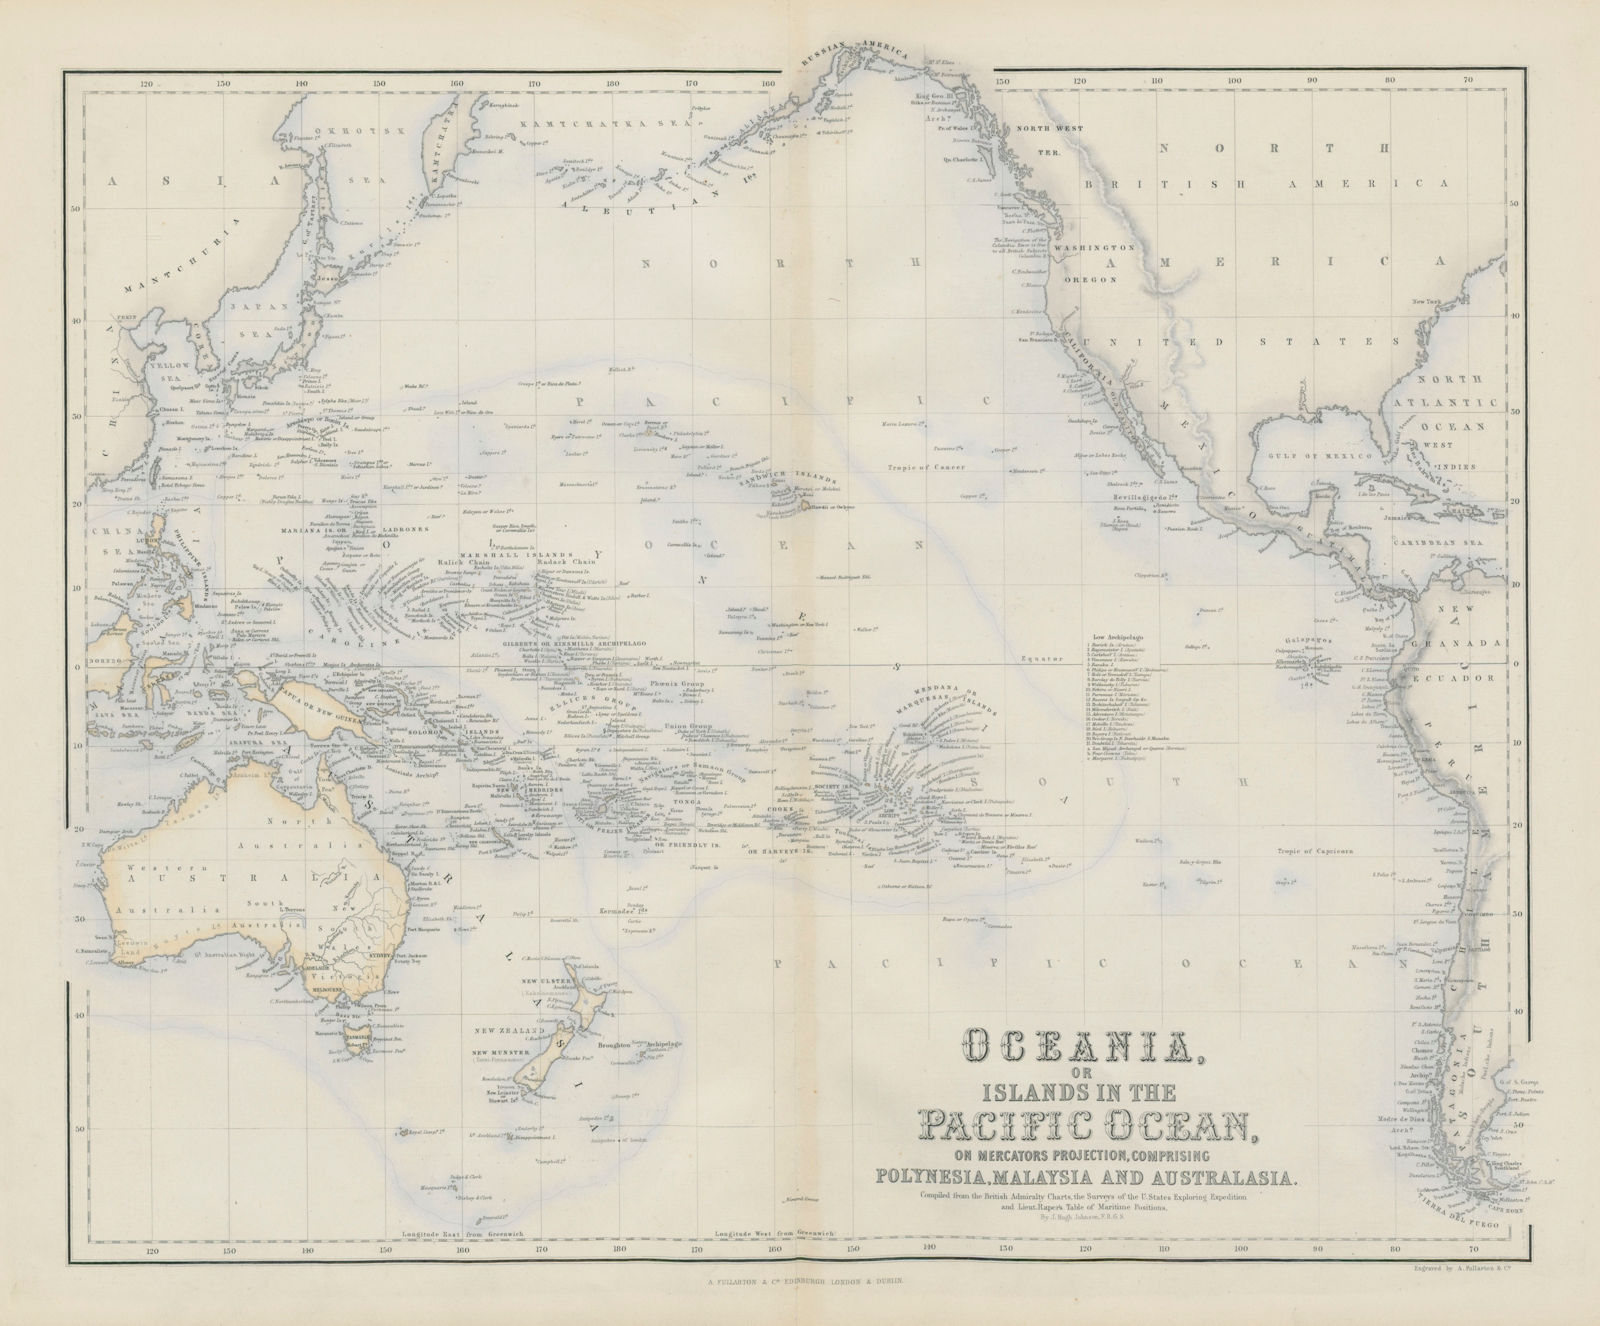 Associate Product Oceania or Islands in the Pacific Ocean. Polynesia Australasia SWANSTON 1860 map